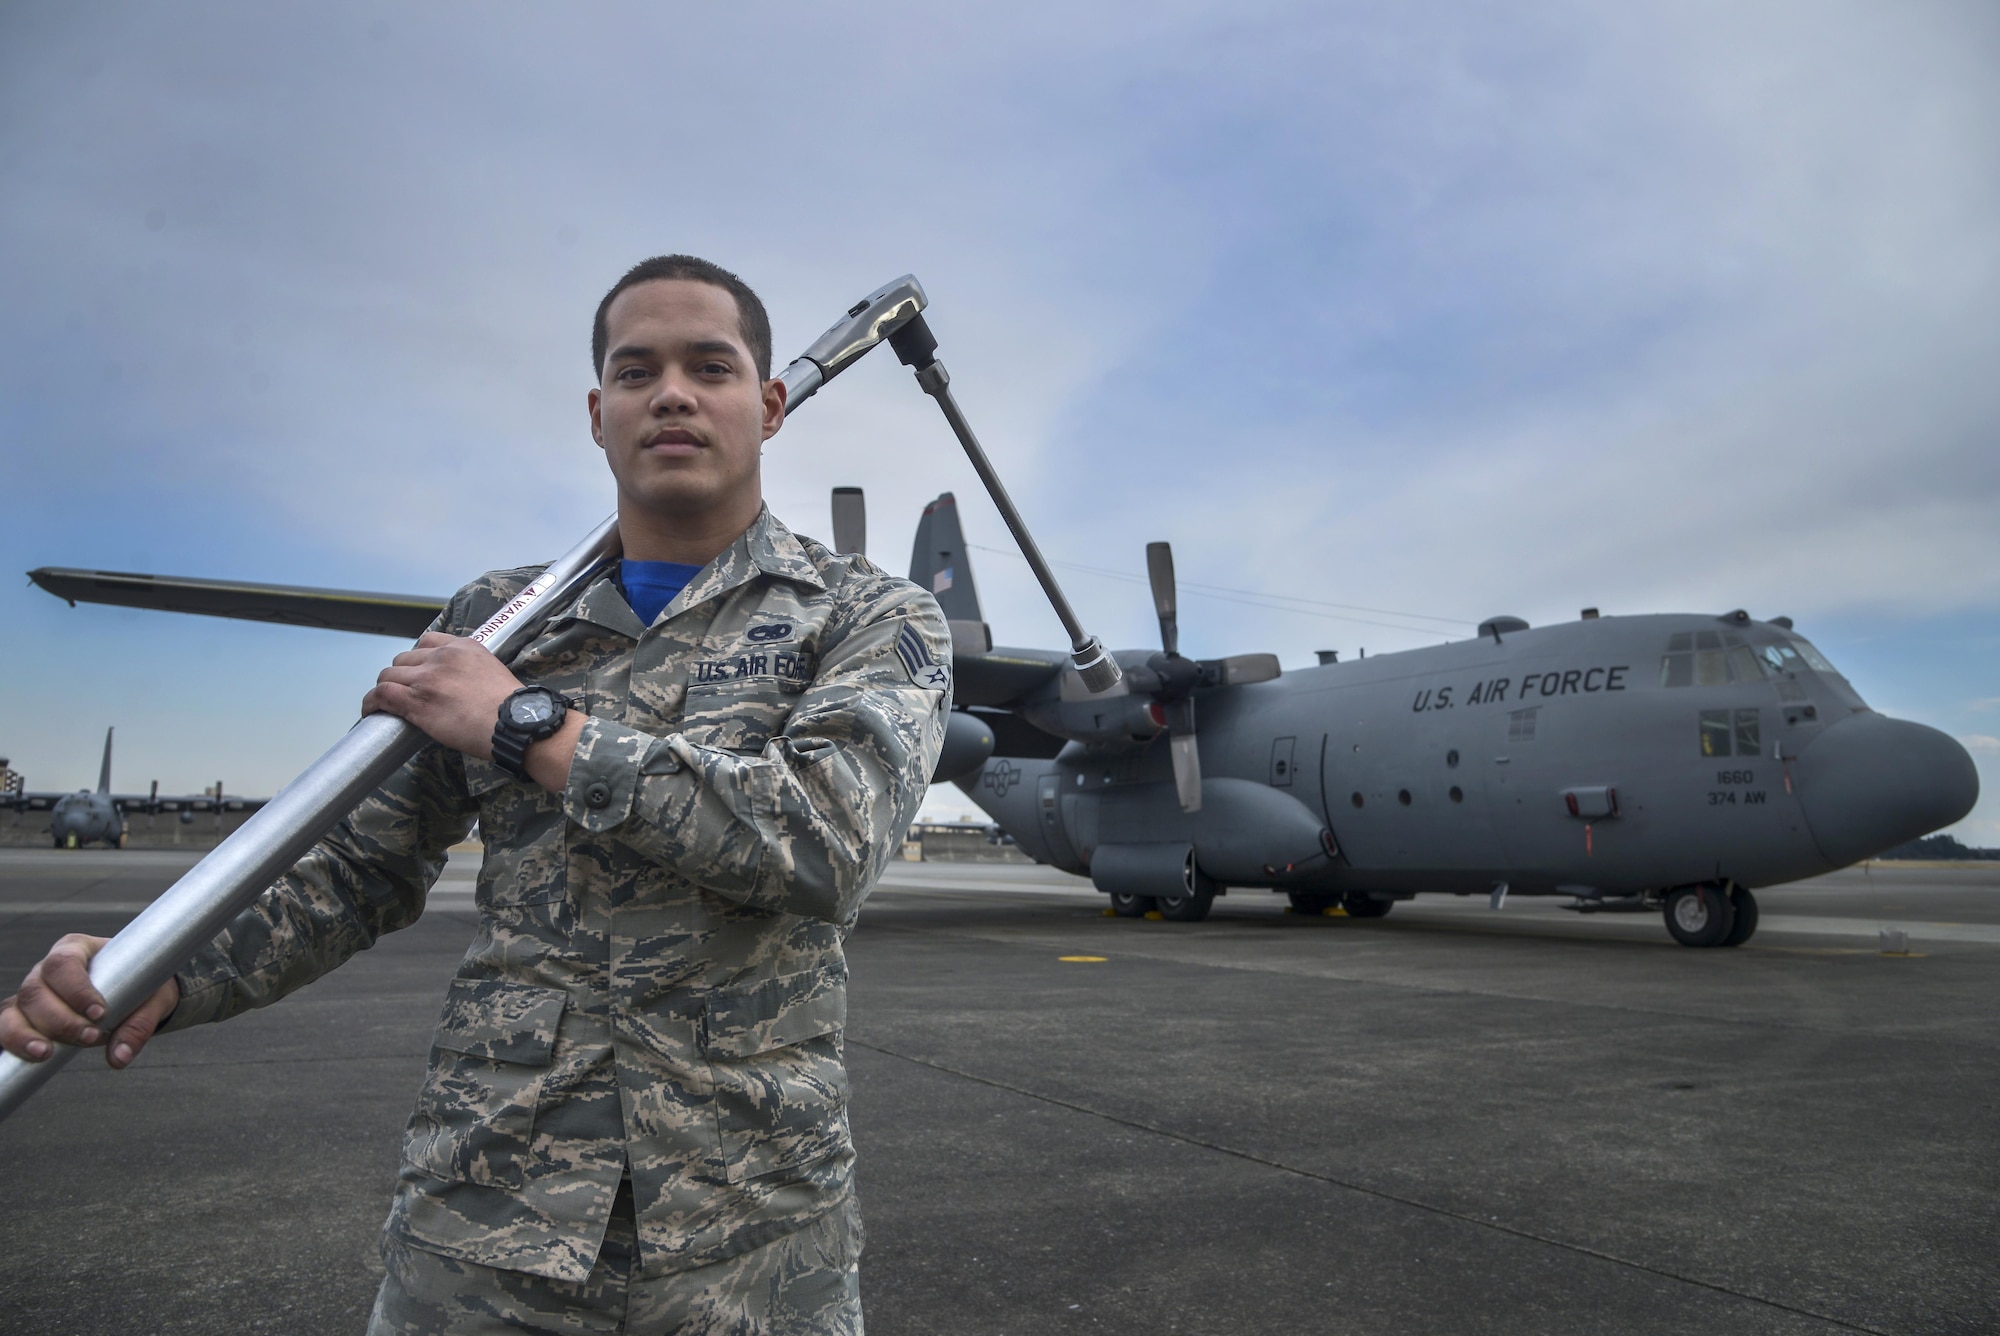 Senior Airman David Rivera, 374th Maintenance Flight aerospace propulsion journeyman, holds a torch wrench in front of a C-130 Hercules at Yokota Air Base, Japan, Feb. 26, 2016. Providing in depth maintenance on the aircraft ensures that Yokota’s mission of generating a professional airlift throughout the region is not impacted. (U.S. Air Force photo by Senior Airman David Owsianka/Released)